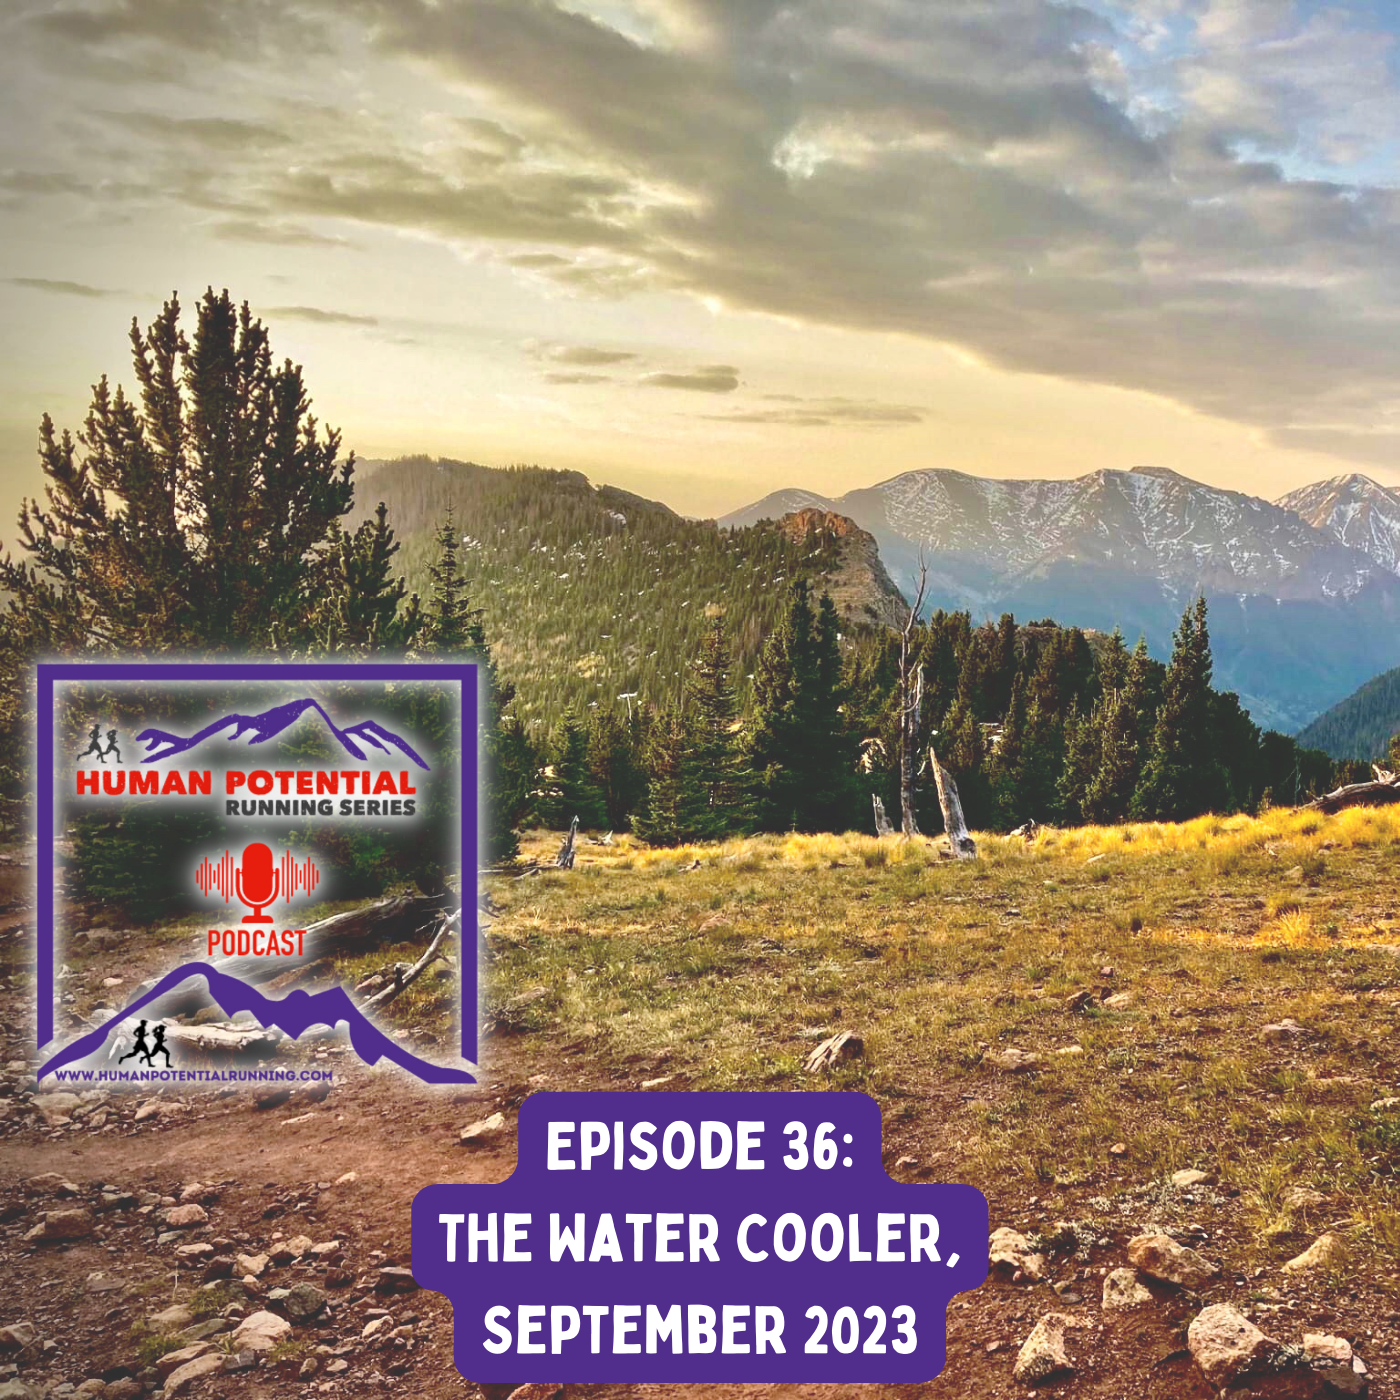 HPRS Podcast – Episode 36: The Water Cooler, September 2023